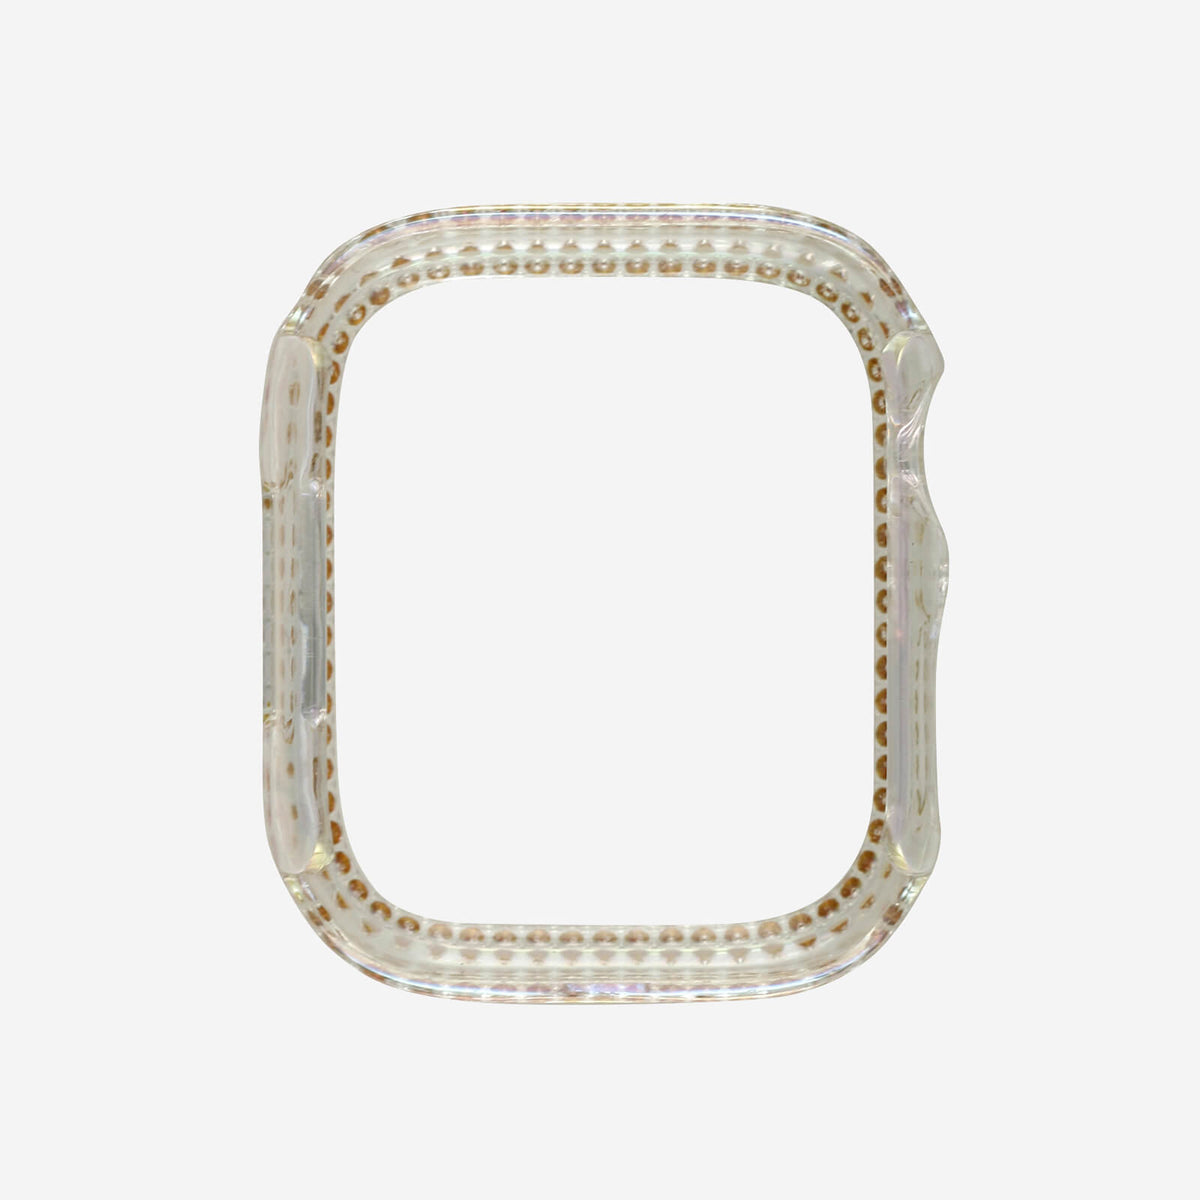 Apple Watch Single Halo Crystal Bumper Case - Pearlescent